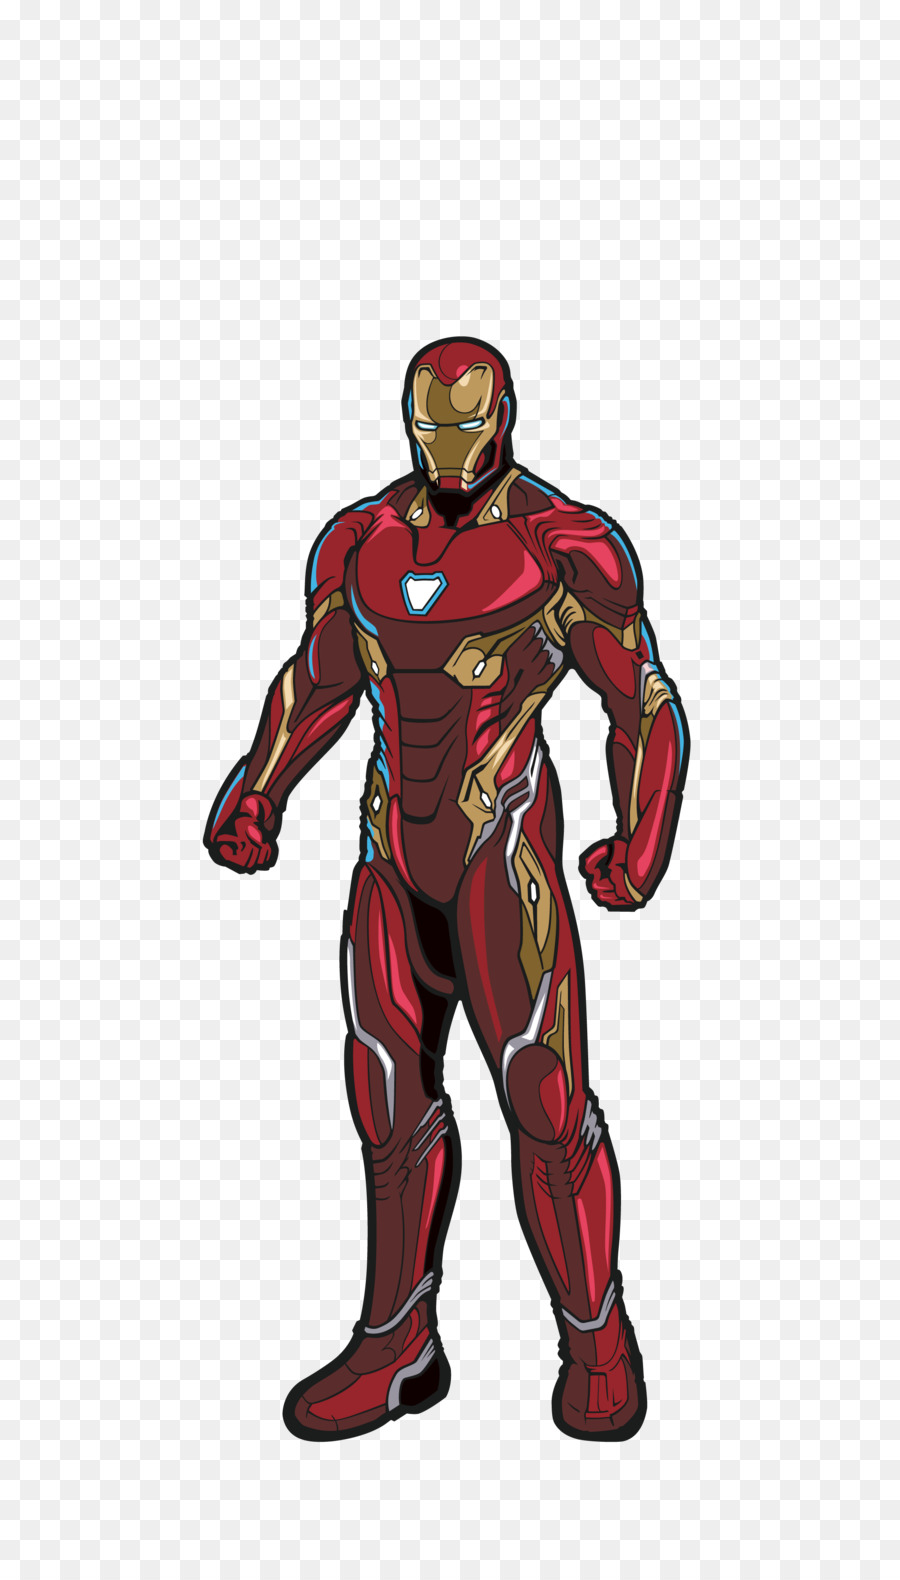 Iron Man Spider-Man The Avengers Captain America Black Panther - backer background png download - 2000*3500 - Free Transparent Iron Man png Download.